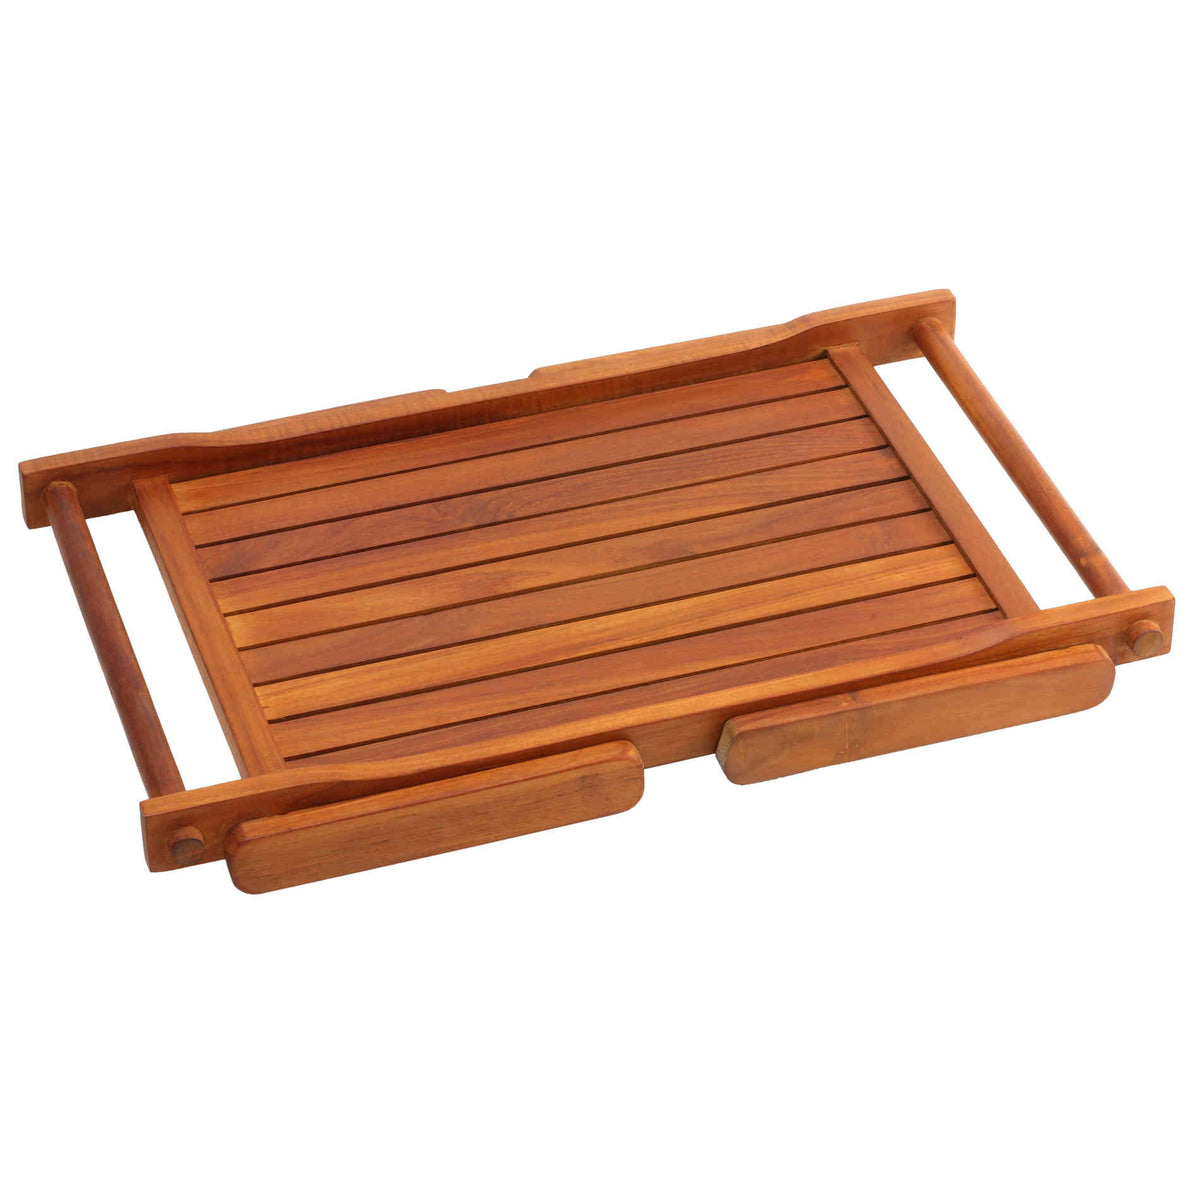 Buy Teak Folding Serving Tray with legs at WaterBrands